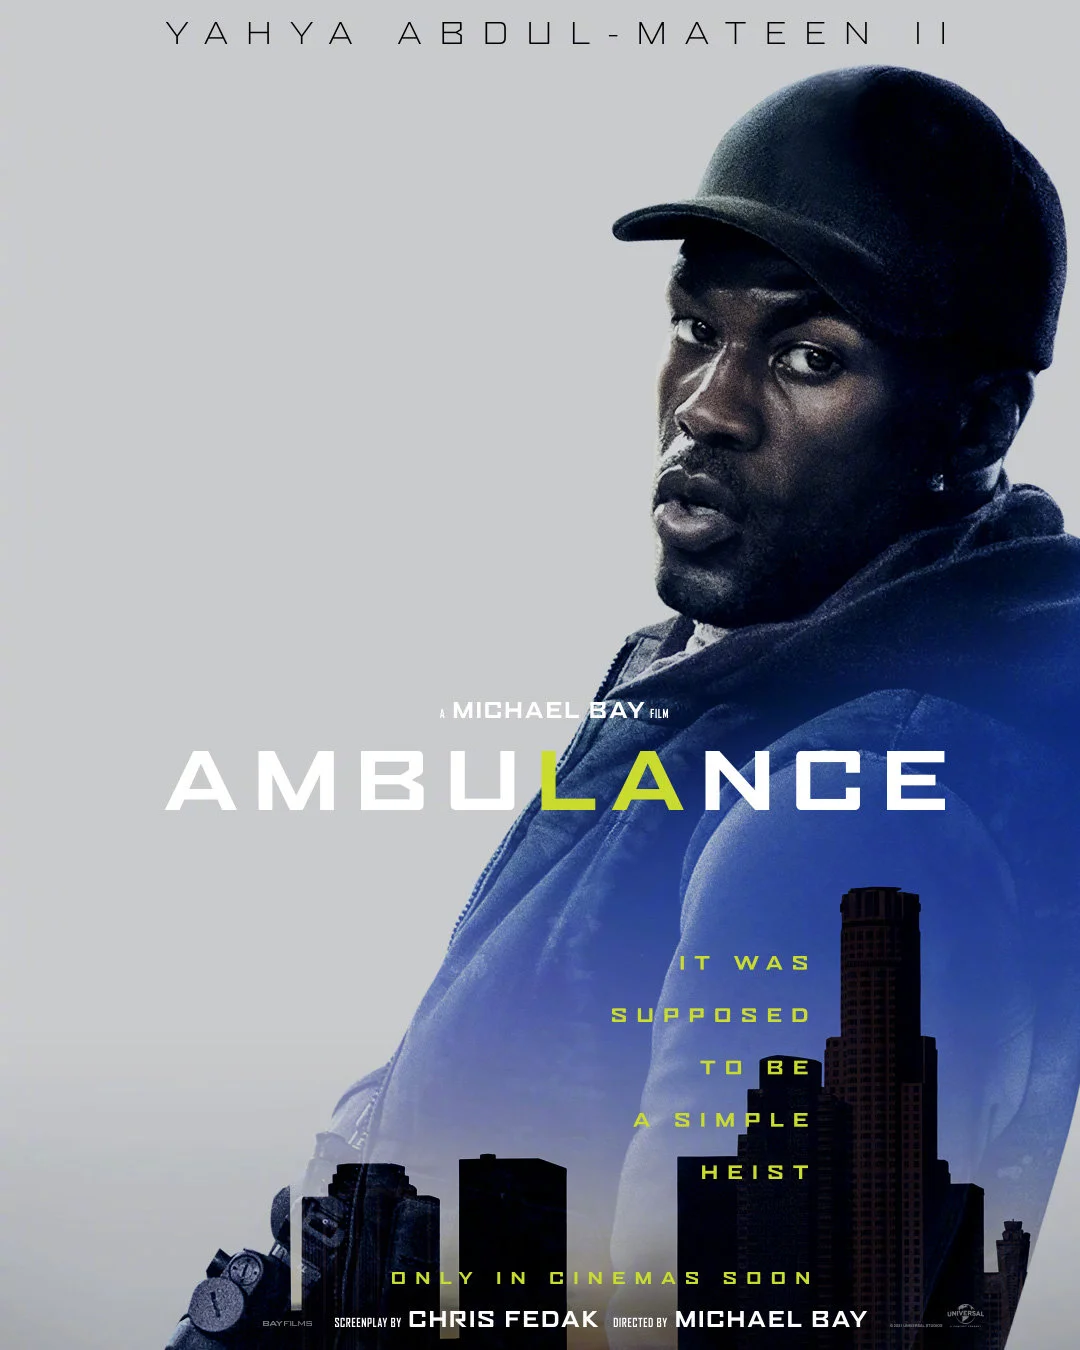 Michael Bay's new film "Ambulance" releases character posters